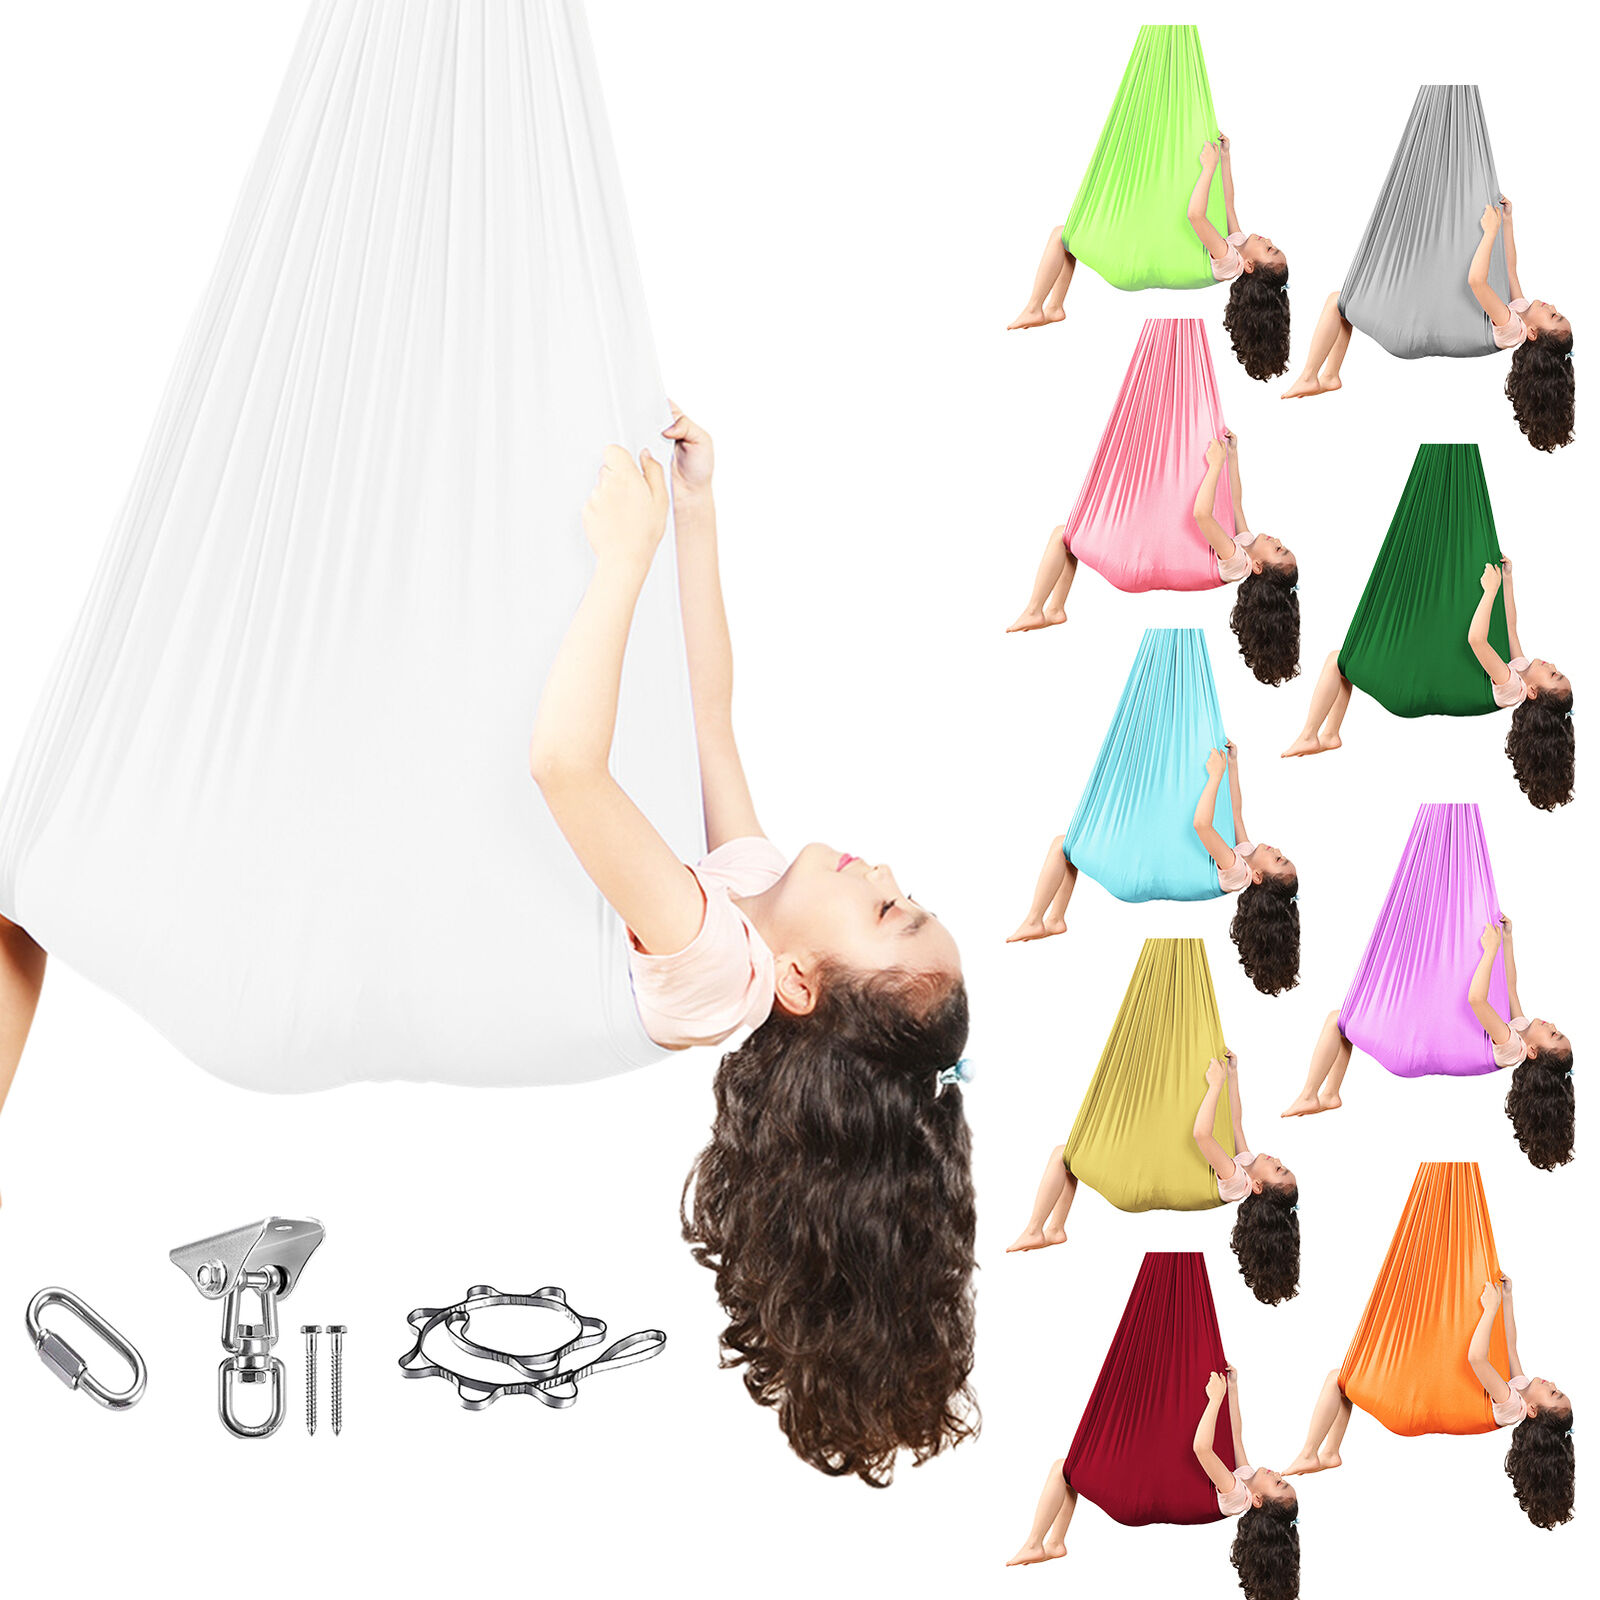 Special ADHD Sensory Therapy Swing for Kids Indoor